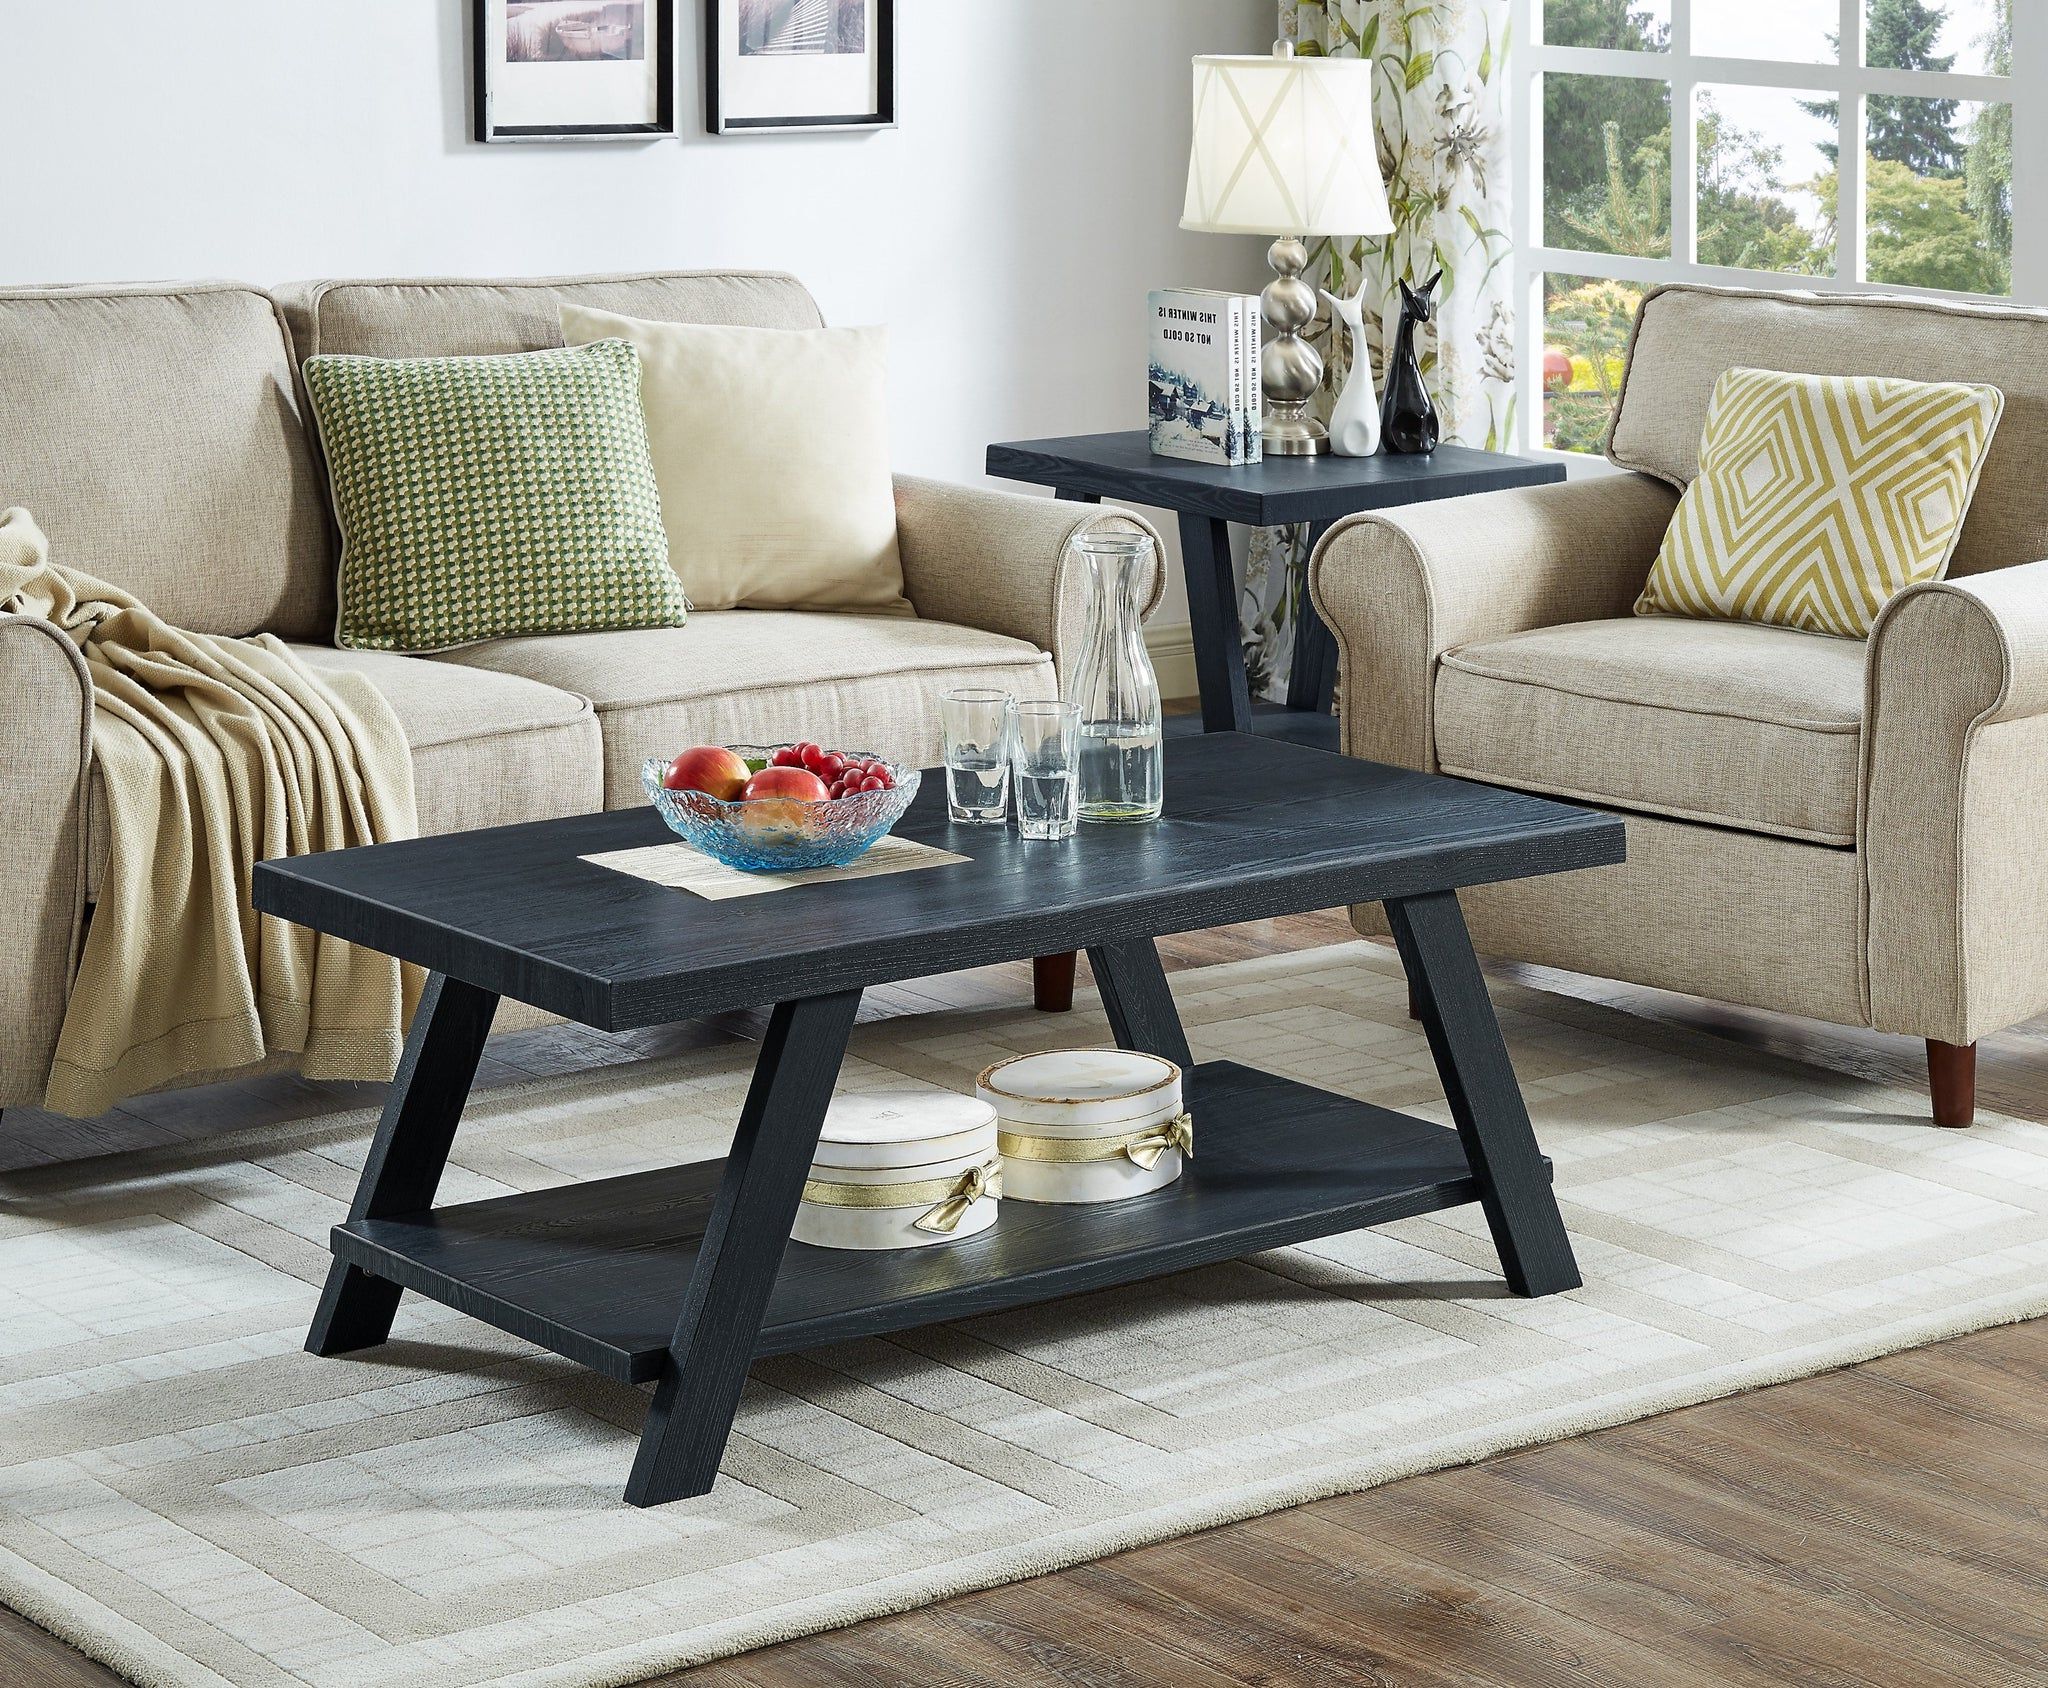 Athens Contemporary Replicated Wood Shelf Coffee Set Table In Black Fi Inside Pemberly Row Replicated Wood Coffee Tables (View 8 of 20)